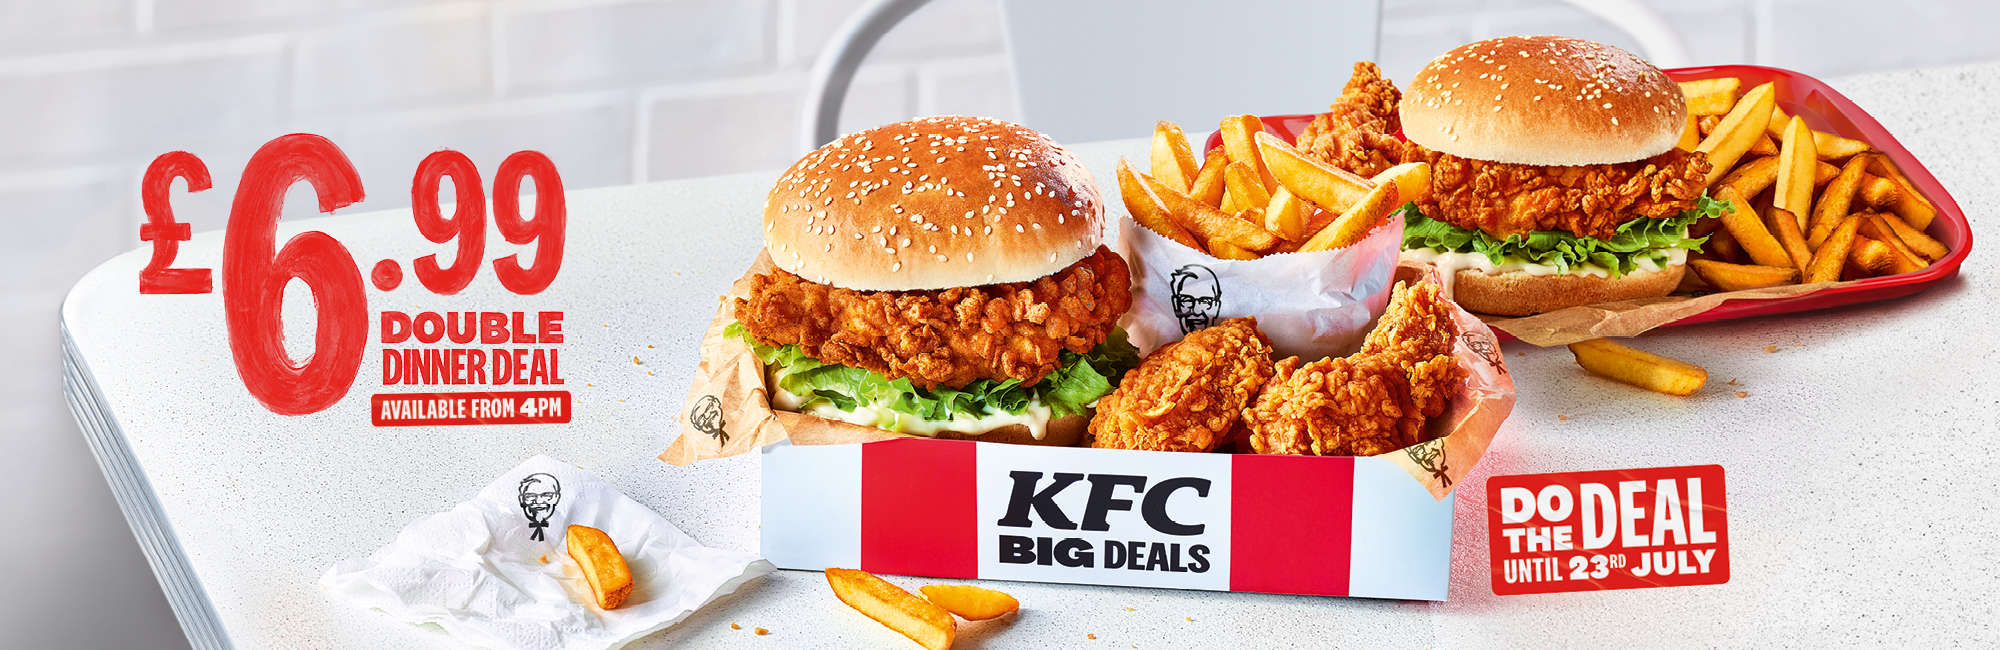 KFC Double Dinner for Two Deal Latest Deals KFC UK